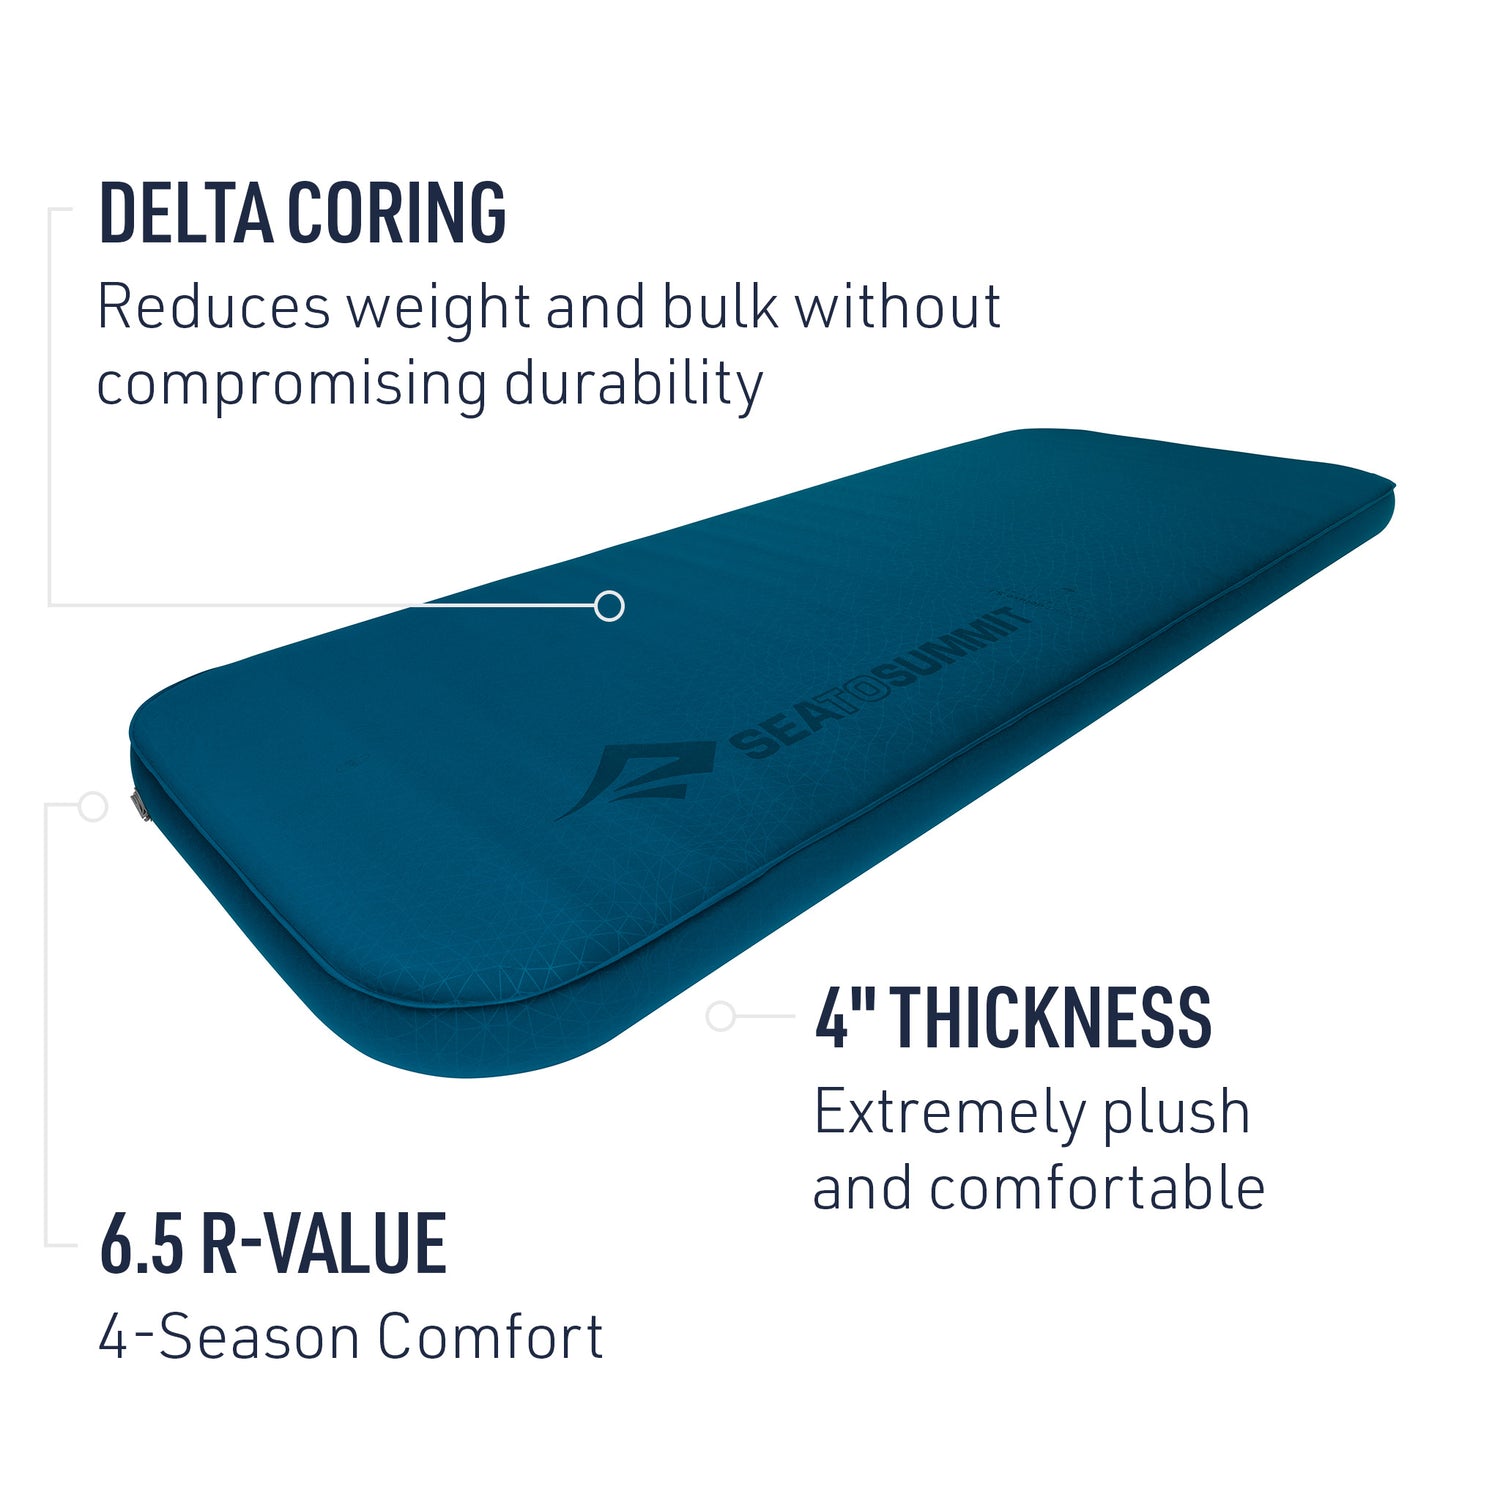 Sea to Summit Comfort Deluxe Insulated Mat